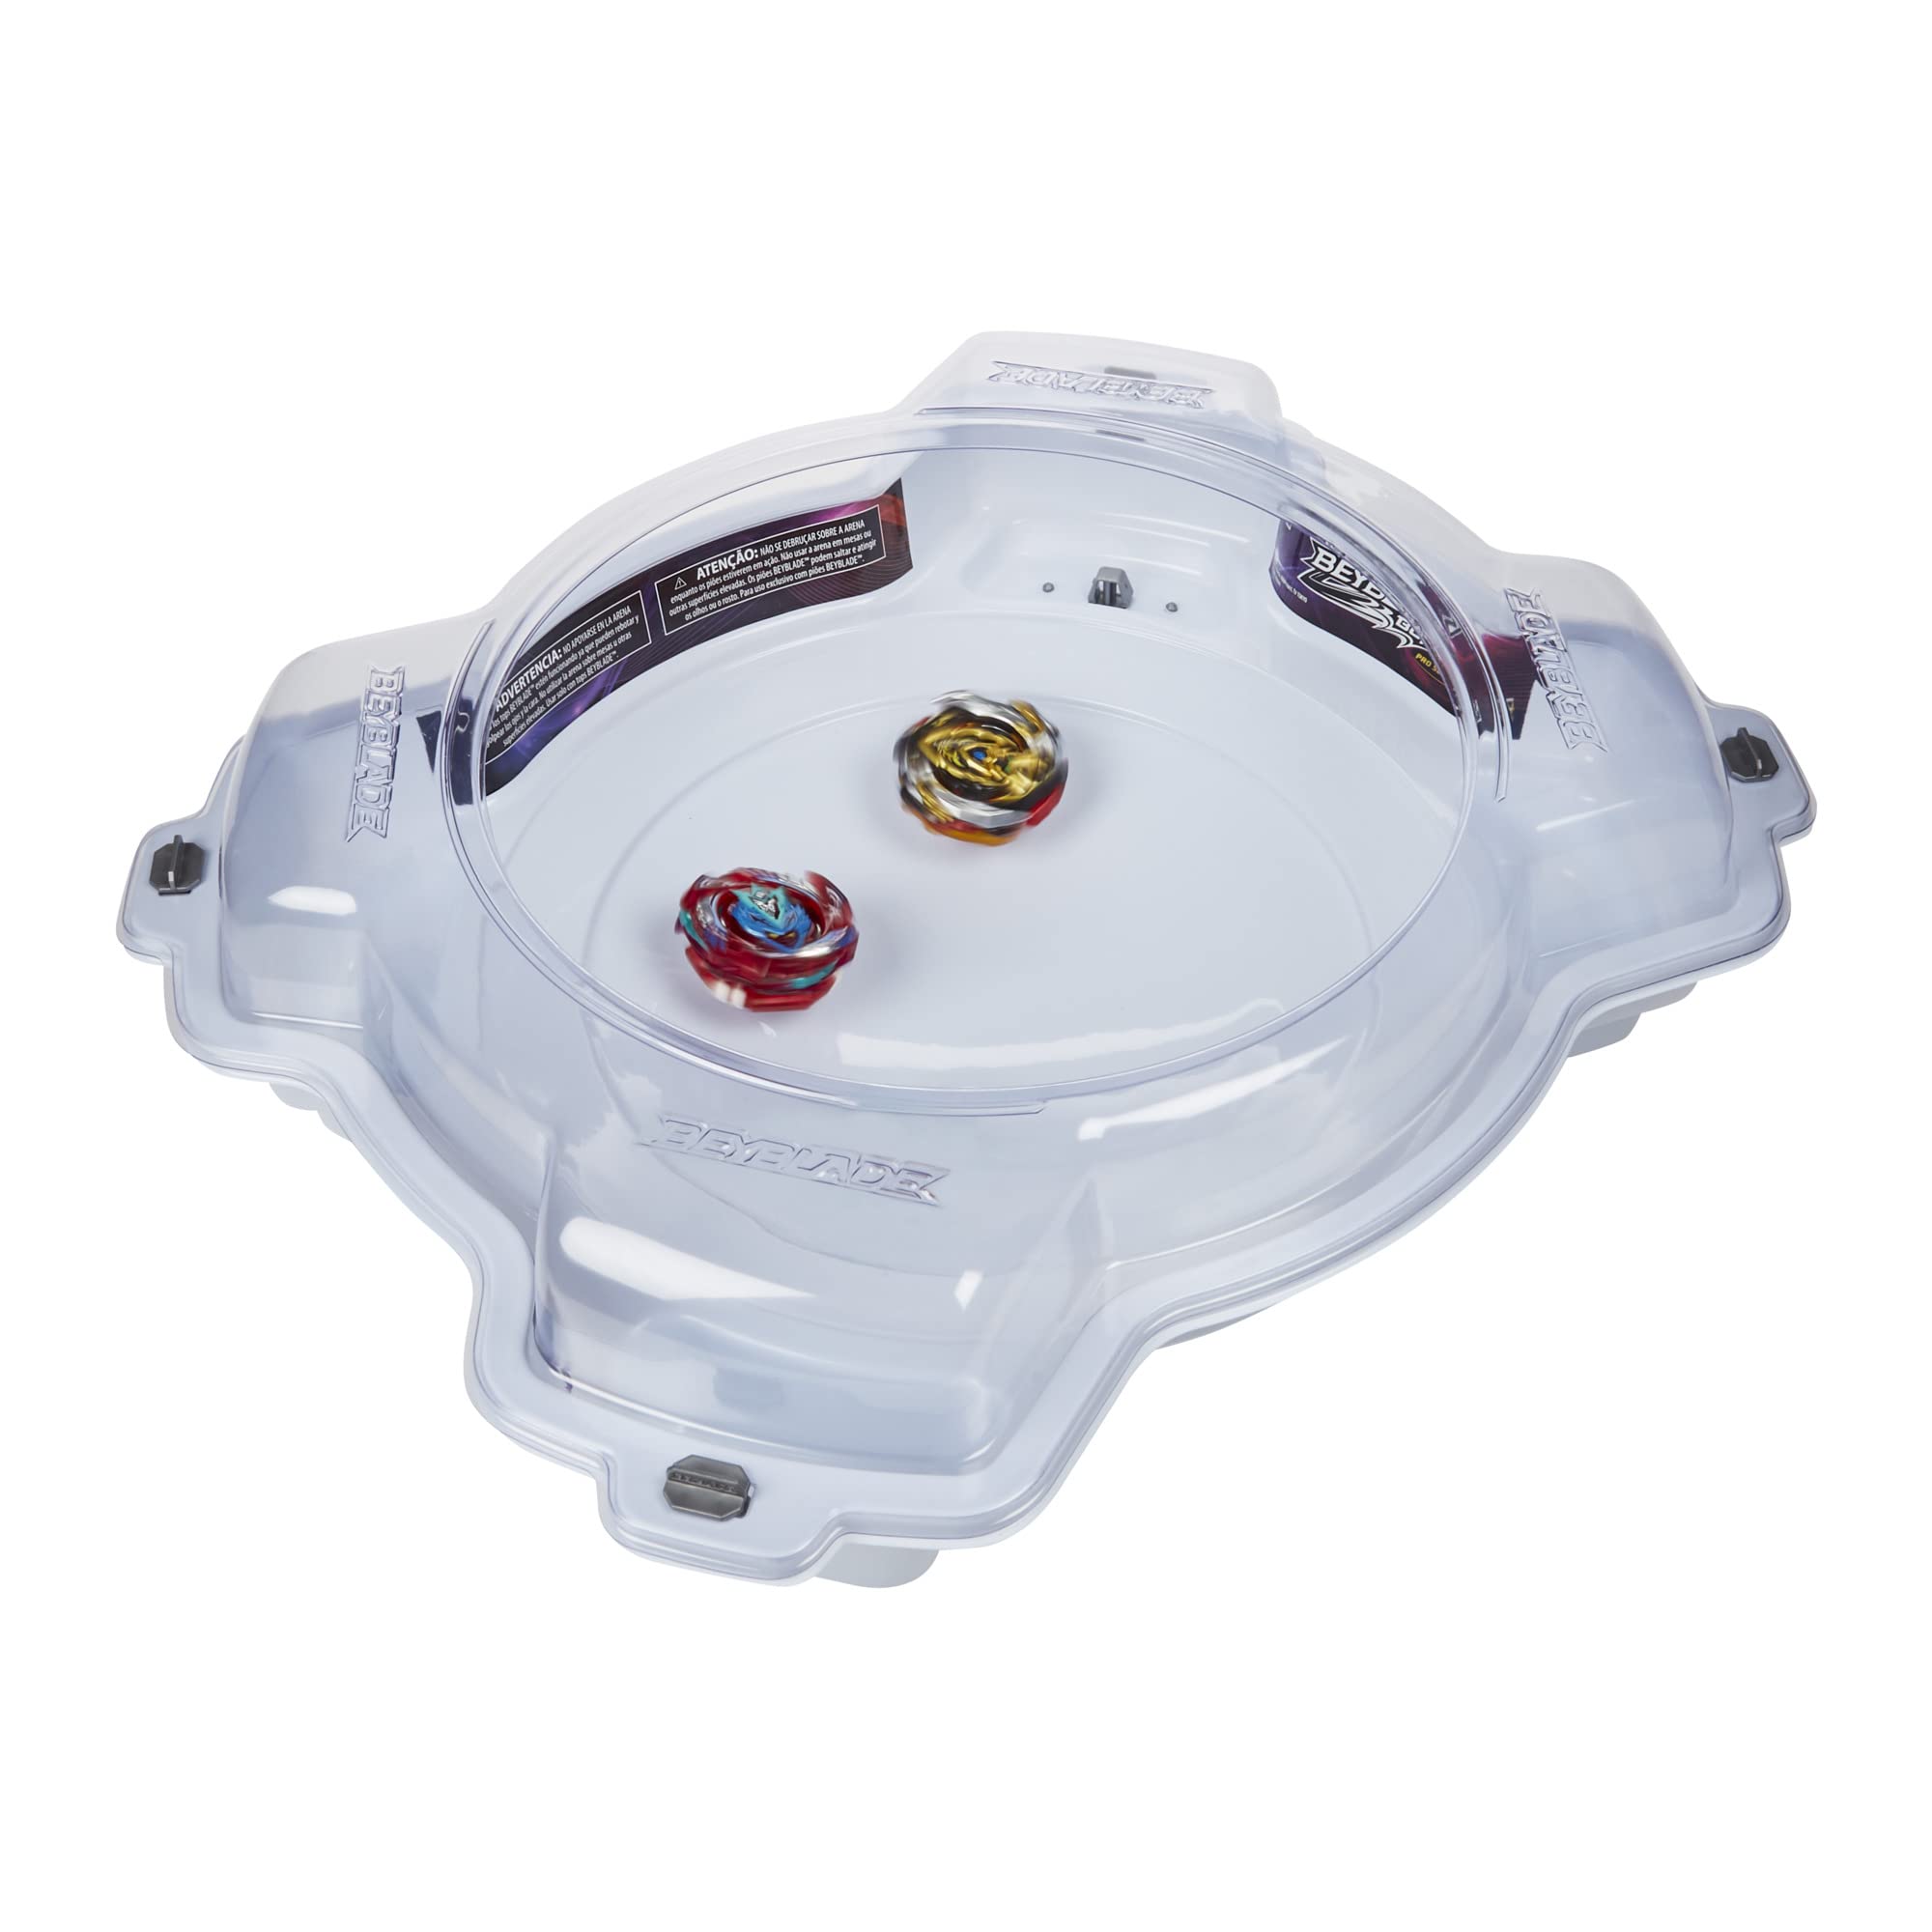 BEYBLADE Burst Pro Series Elite Champions Pro Set - Complete Battle Game Set with Beystadium, 2 Battling Top Toys and 2 Launchers